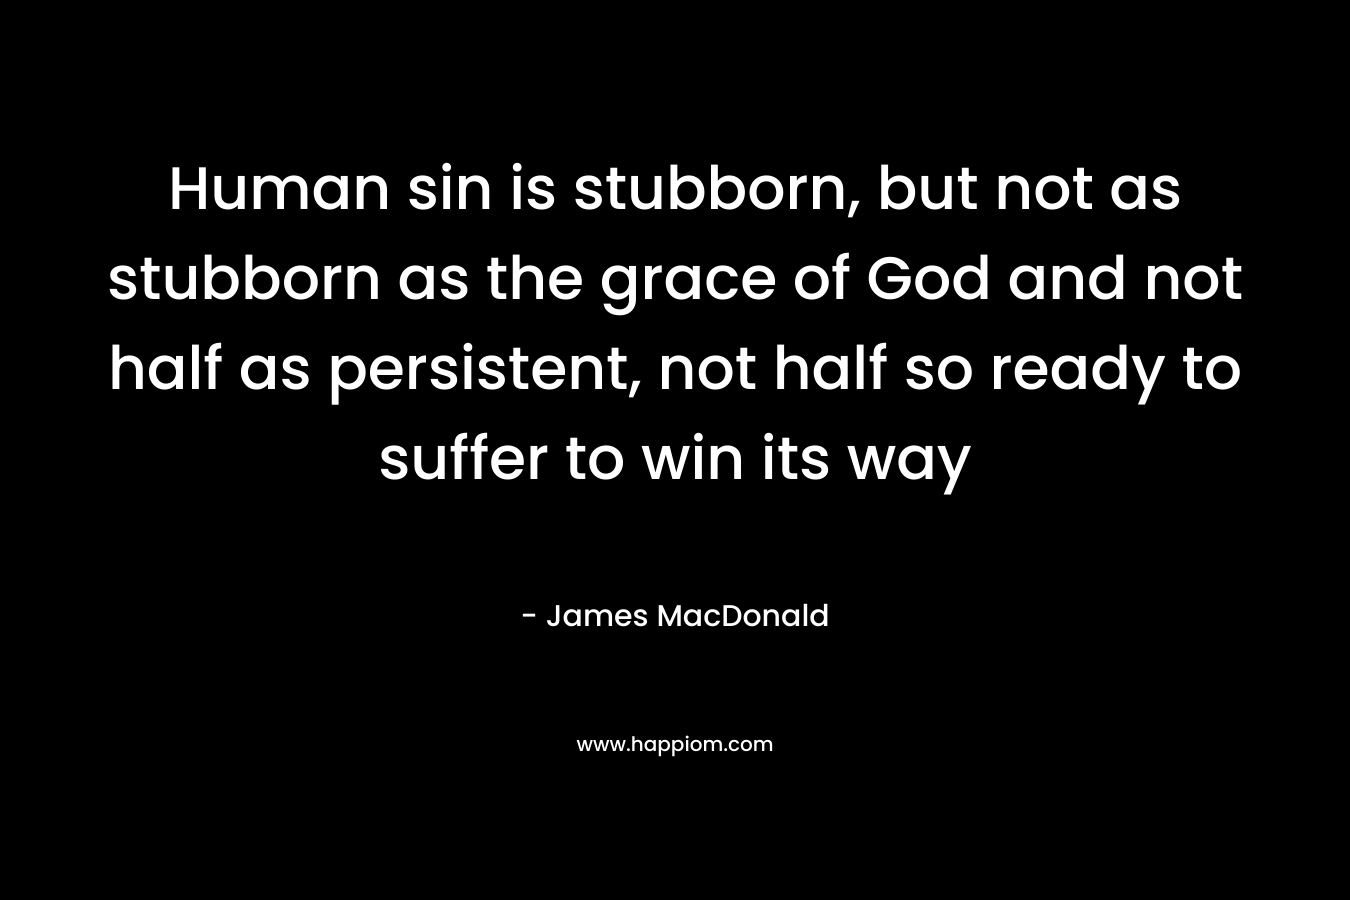 Human sin is stubborn, but not as stubborn as the grace of God and not half as persistent, not half so ready to suffer to win its way